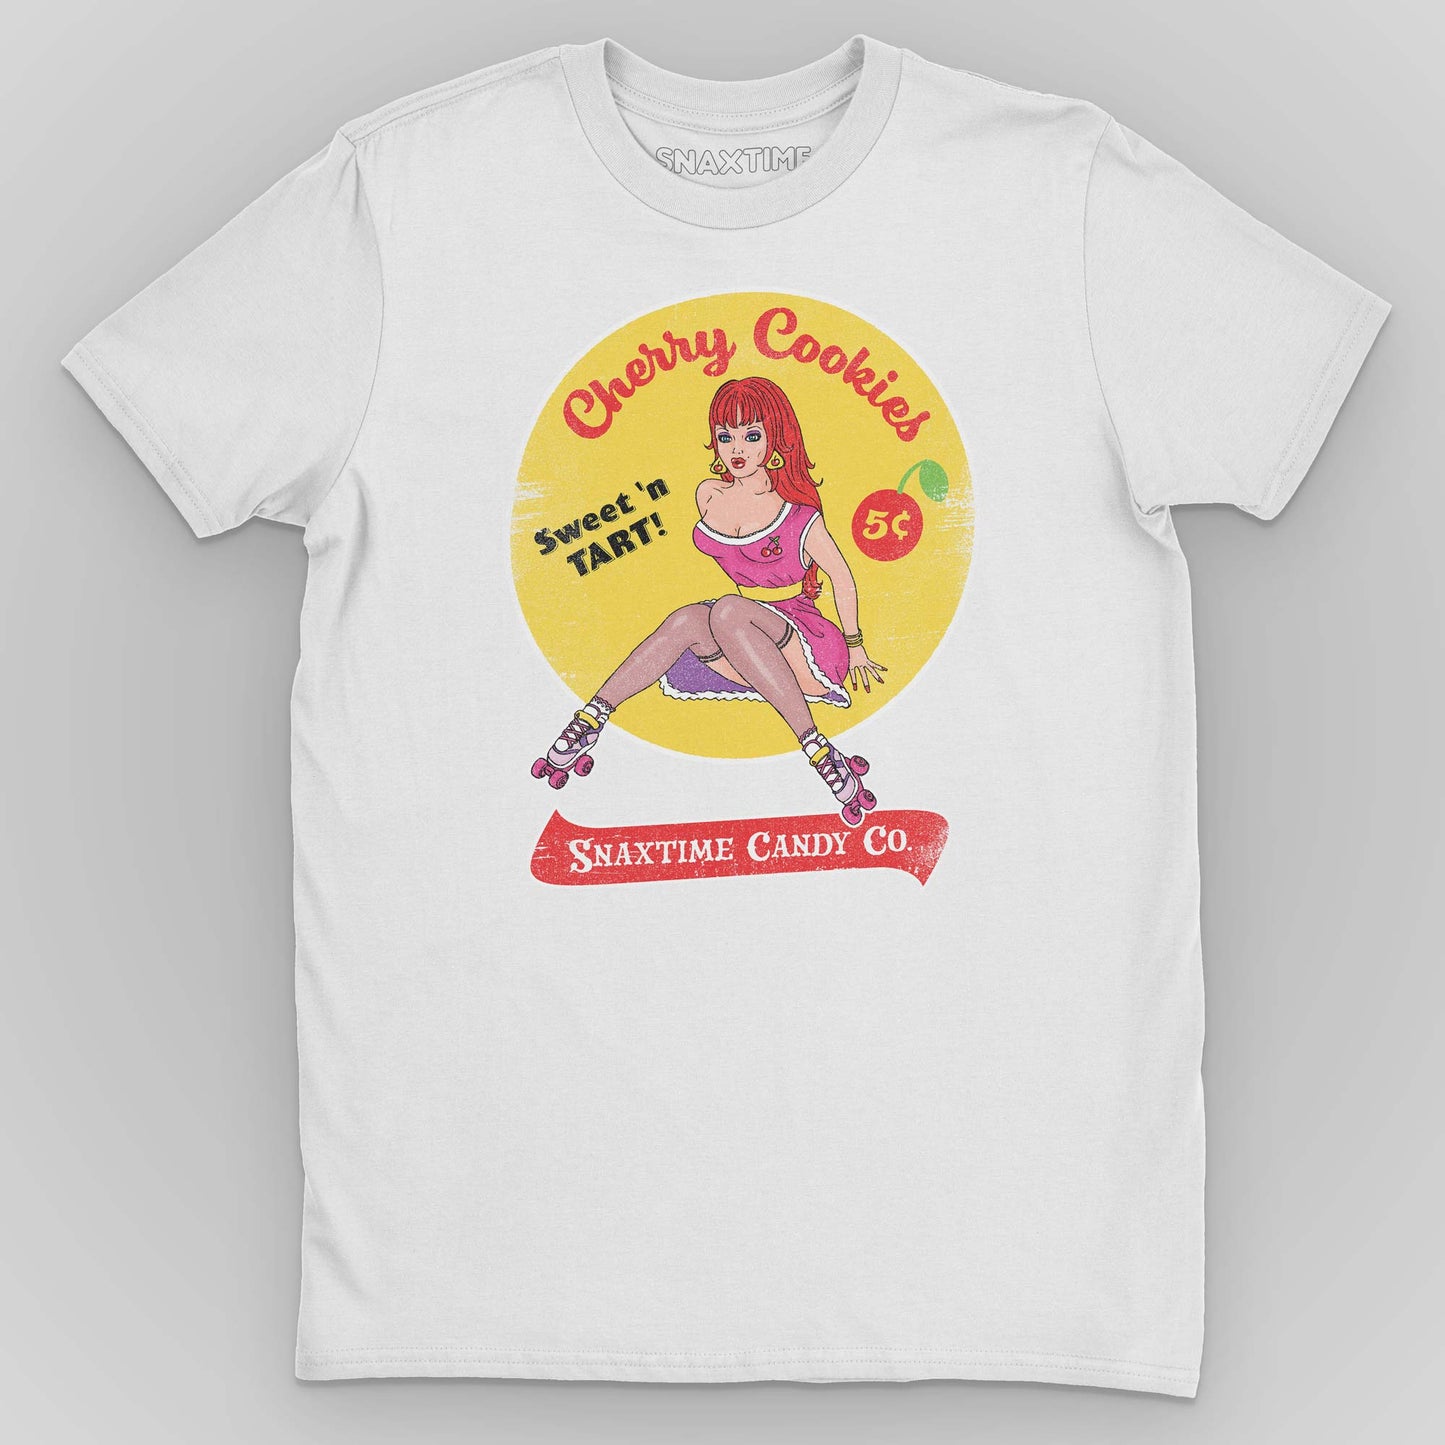 White Cherry Cookies Retro Comic Pinup Graphic T-Shirt by Snaxtime